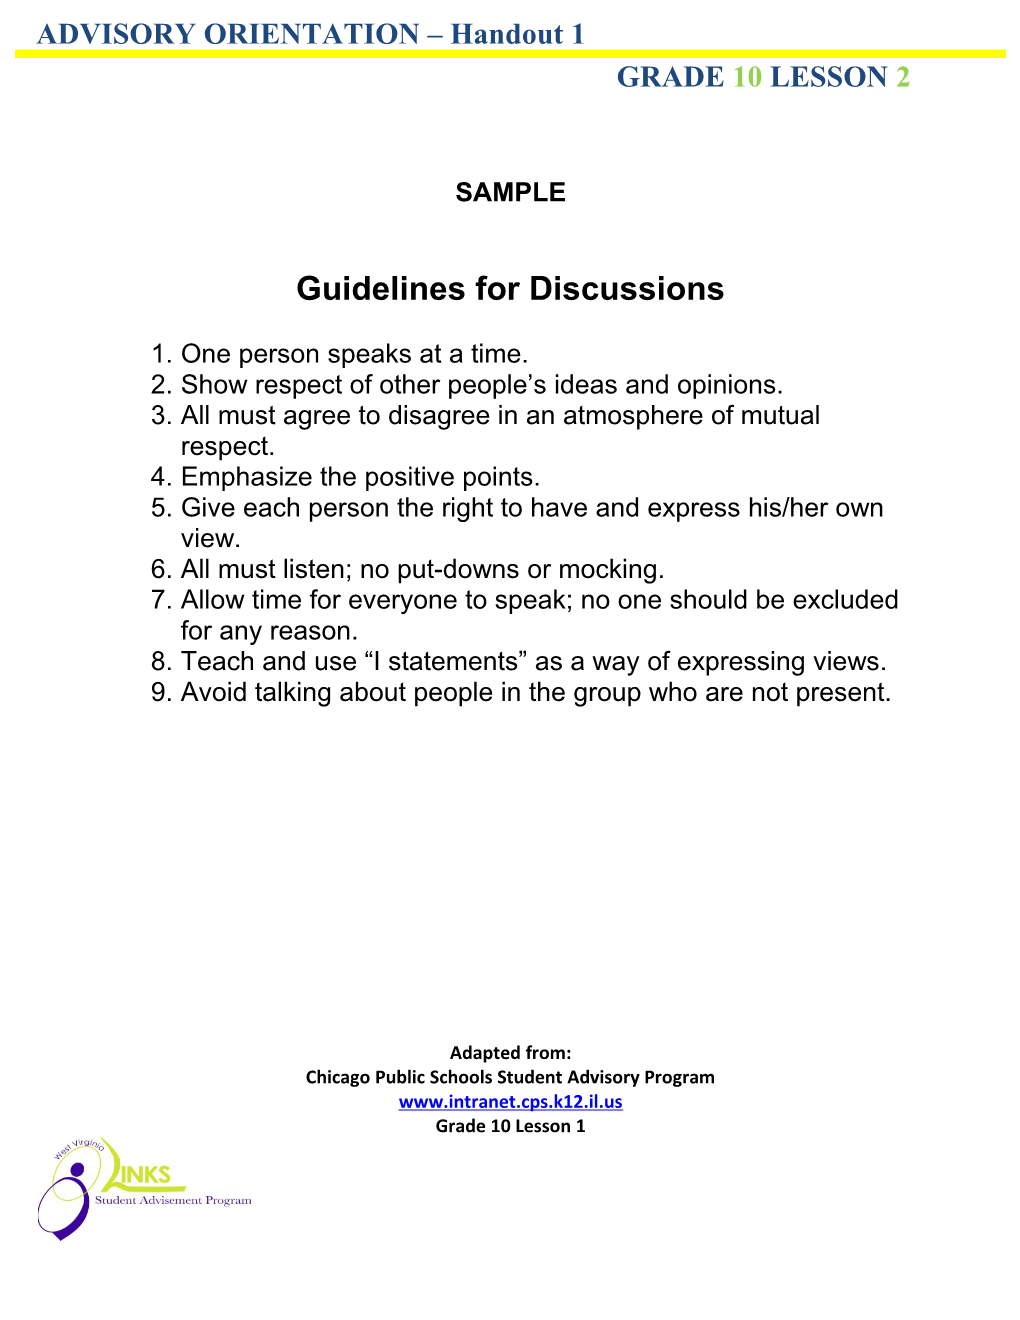 Guidelines for Discussions